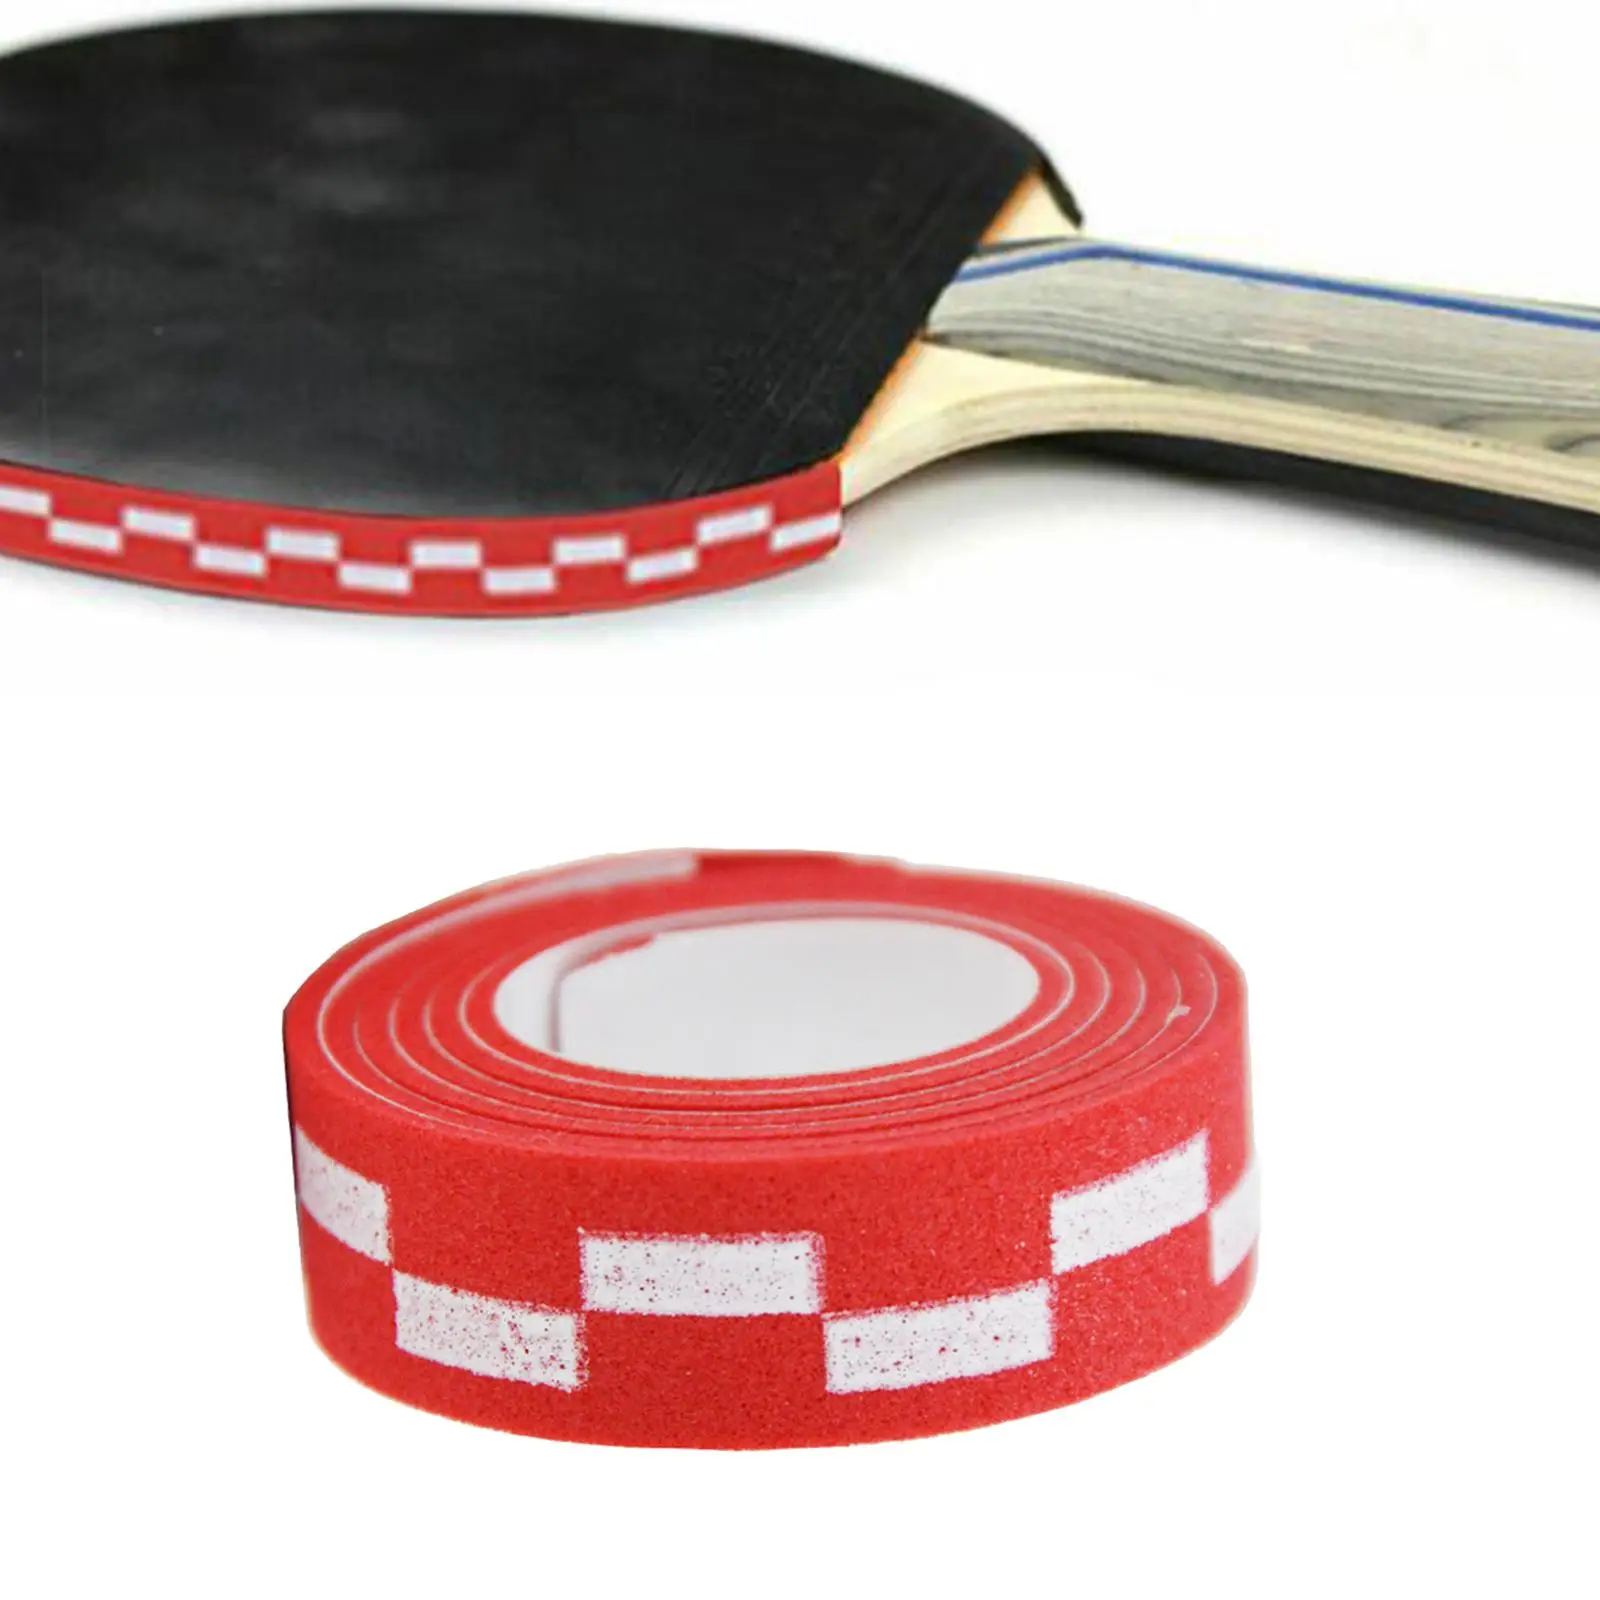 Table Tennis Racket Edge Tape 10mm 45cm Protector Anti Collision Pickleball Paddle Edge Tape Side Tape Durable Wear Resistant